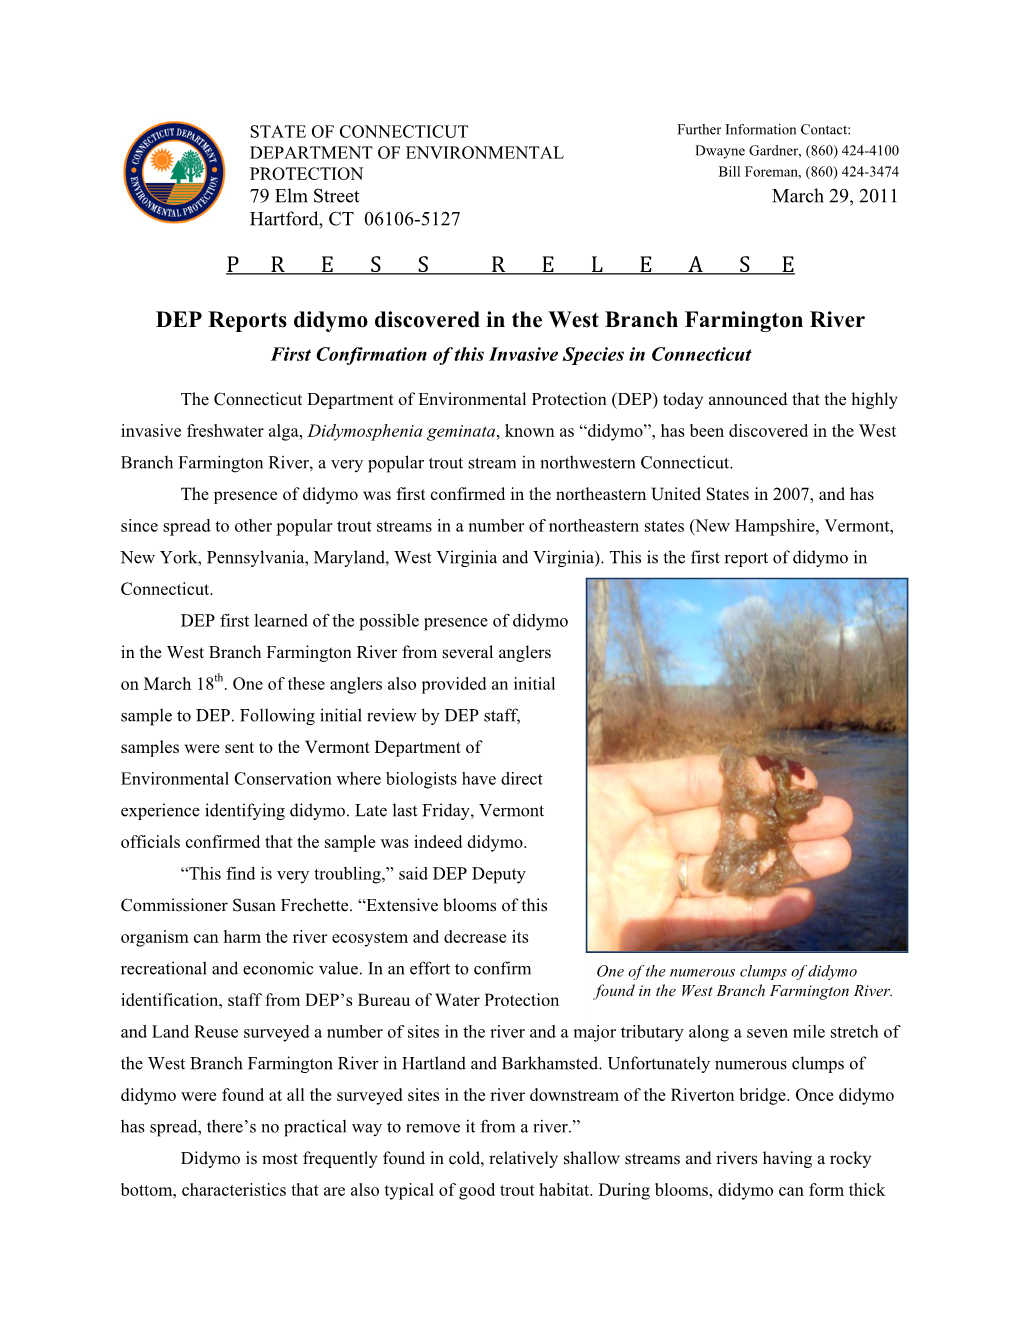 Ct Deep Press Release on the Invasive Algae, Didymo Found on The